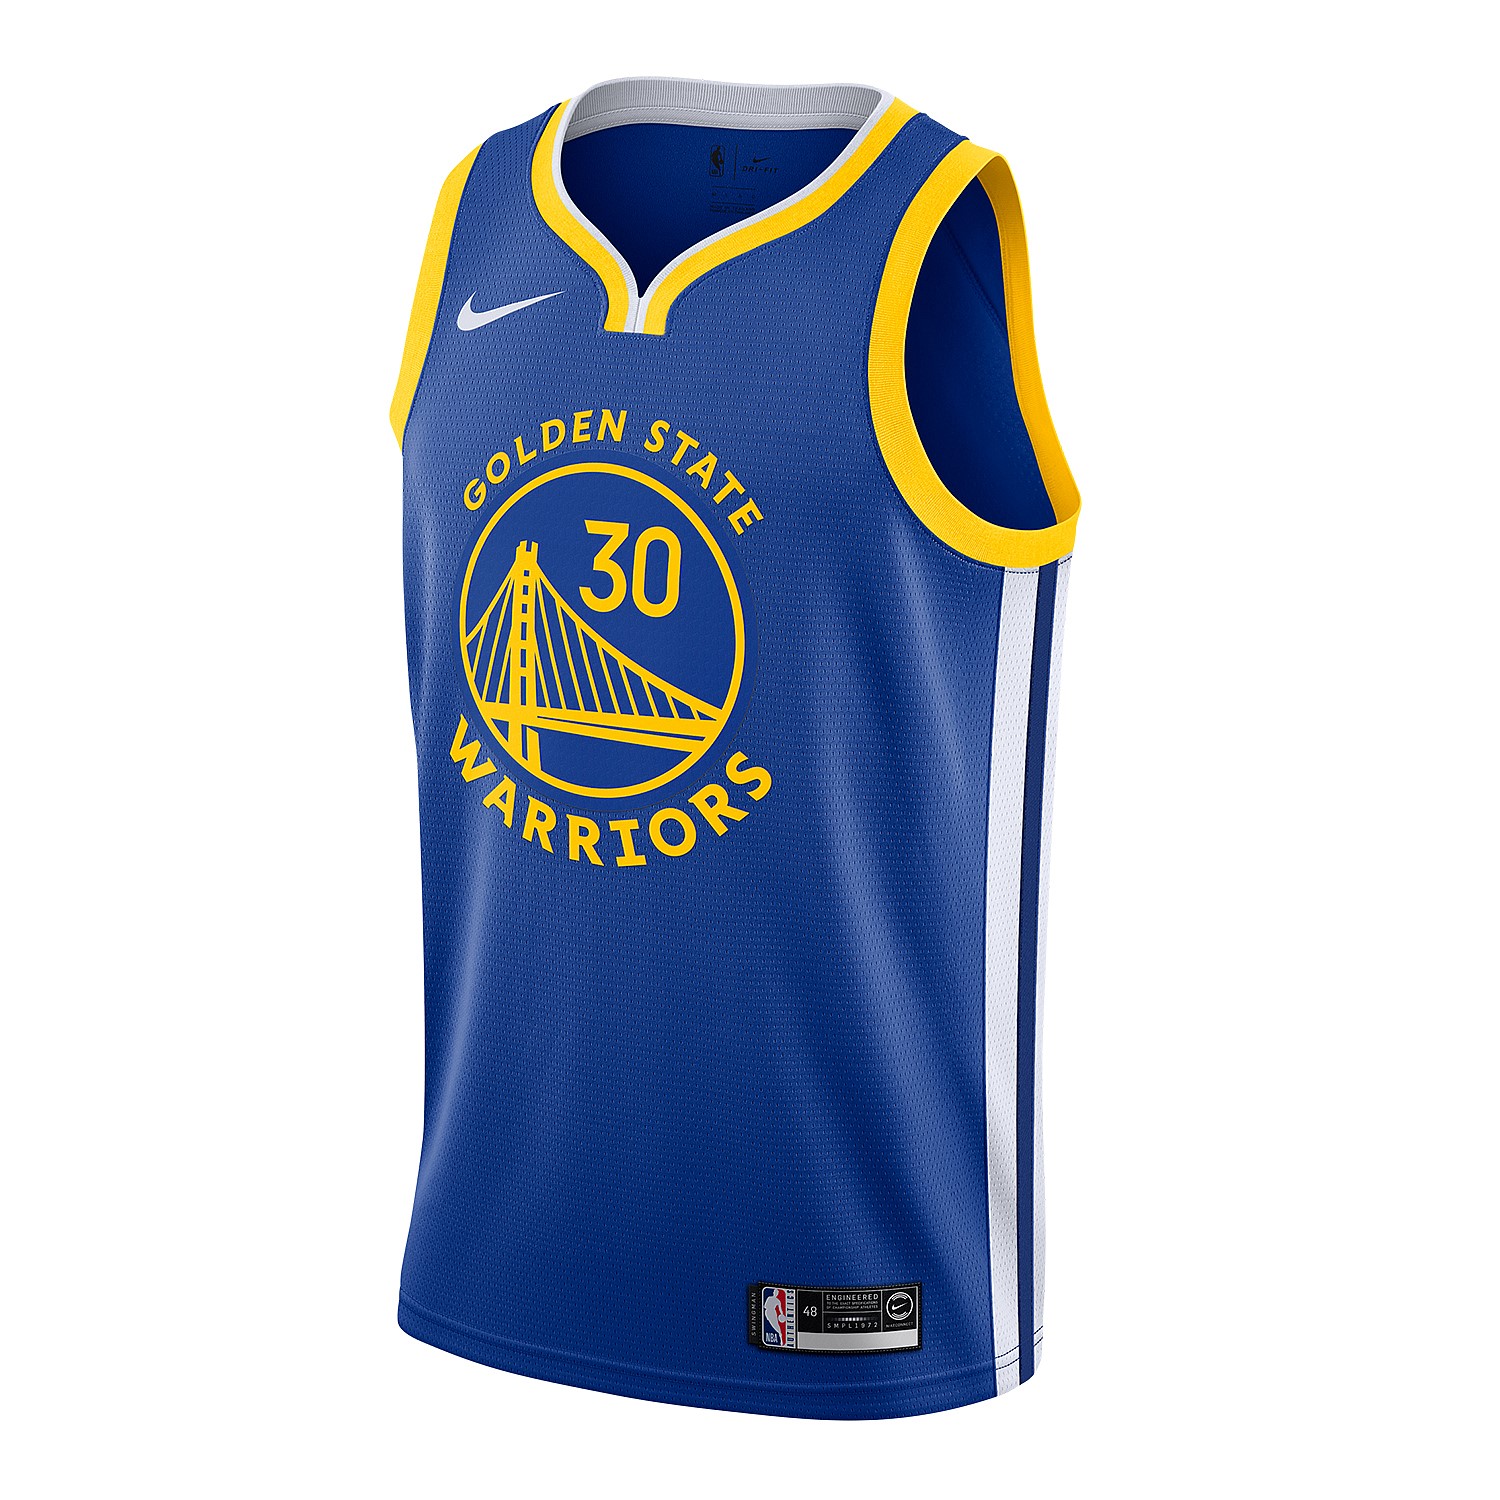 golden state warriors shirts near me jersey on sale